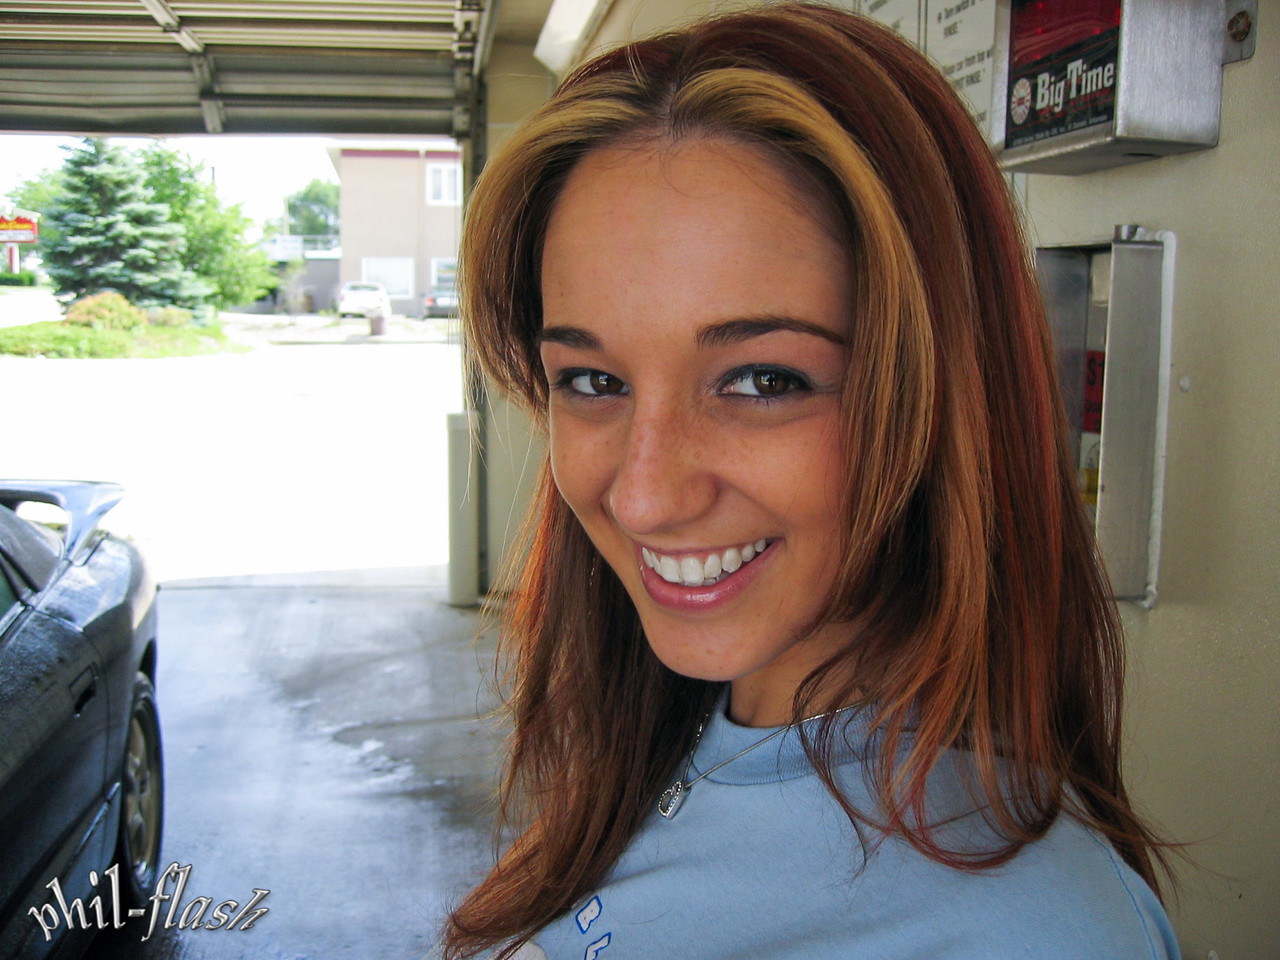 Amateur solo girl Nikki Sims washers her vehicle in cutoff shorts foto porno #425322667